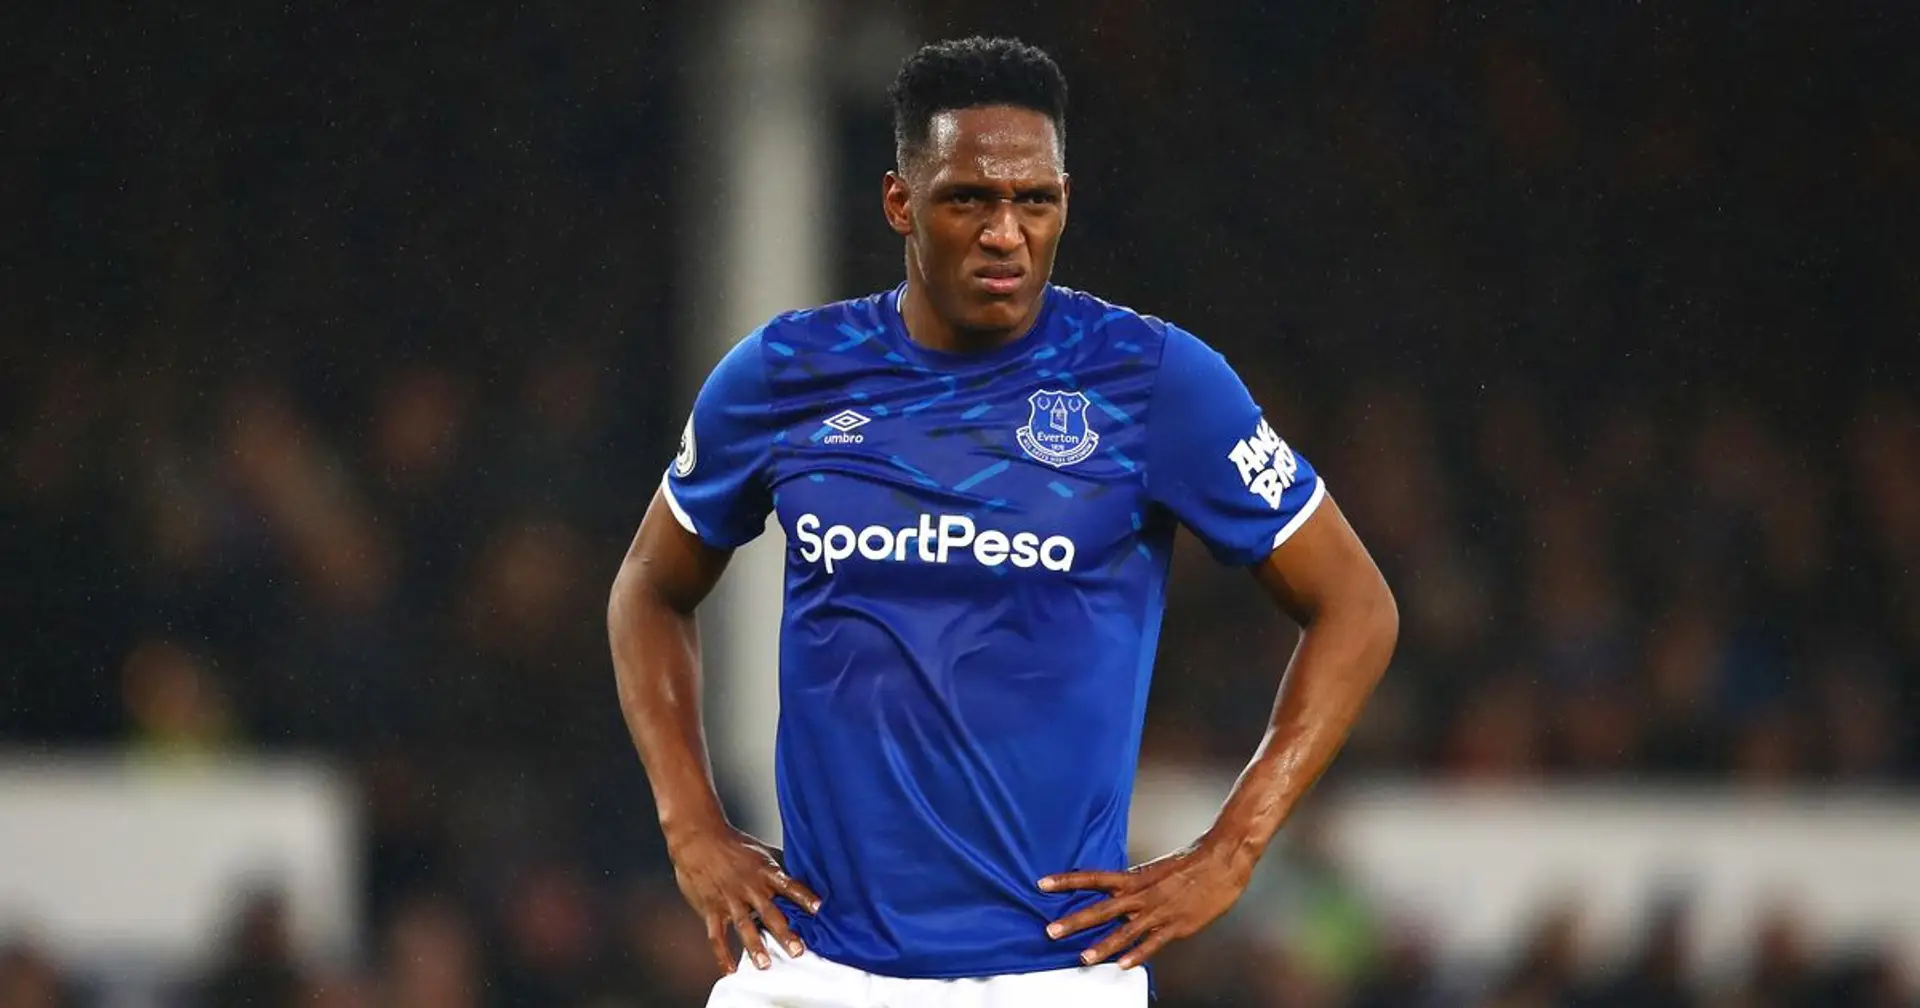 Yerry Mina regrets not making use of his chances at Barca: 'Those few minutes I did get out on the pitch, I played badly'